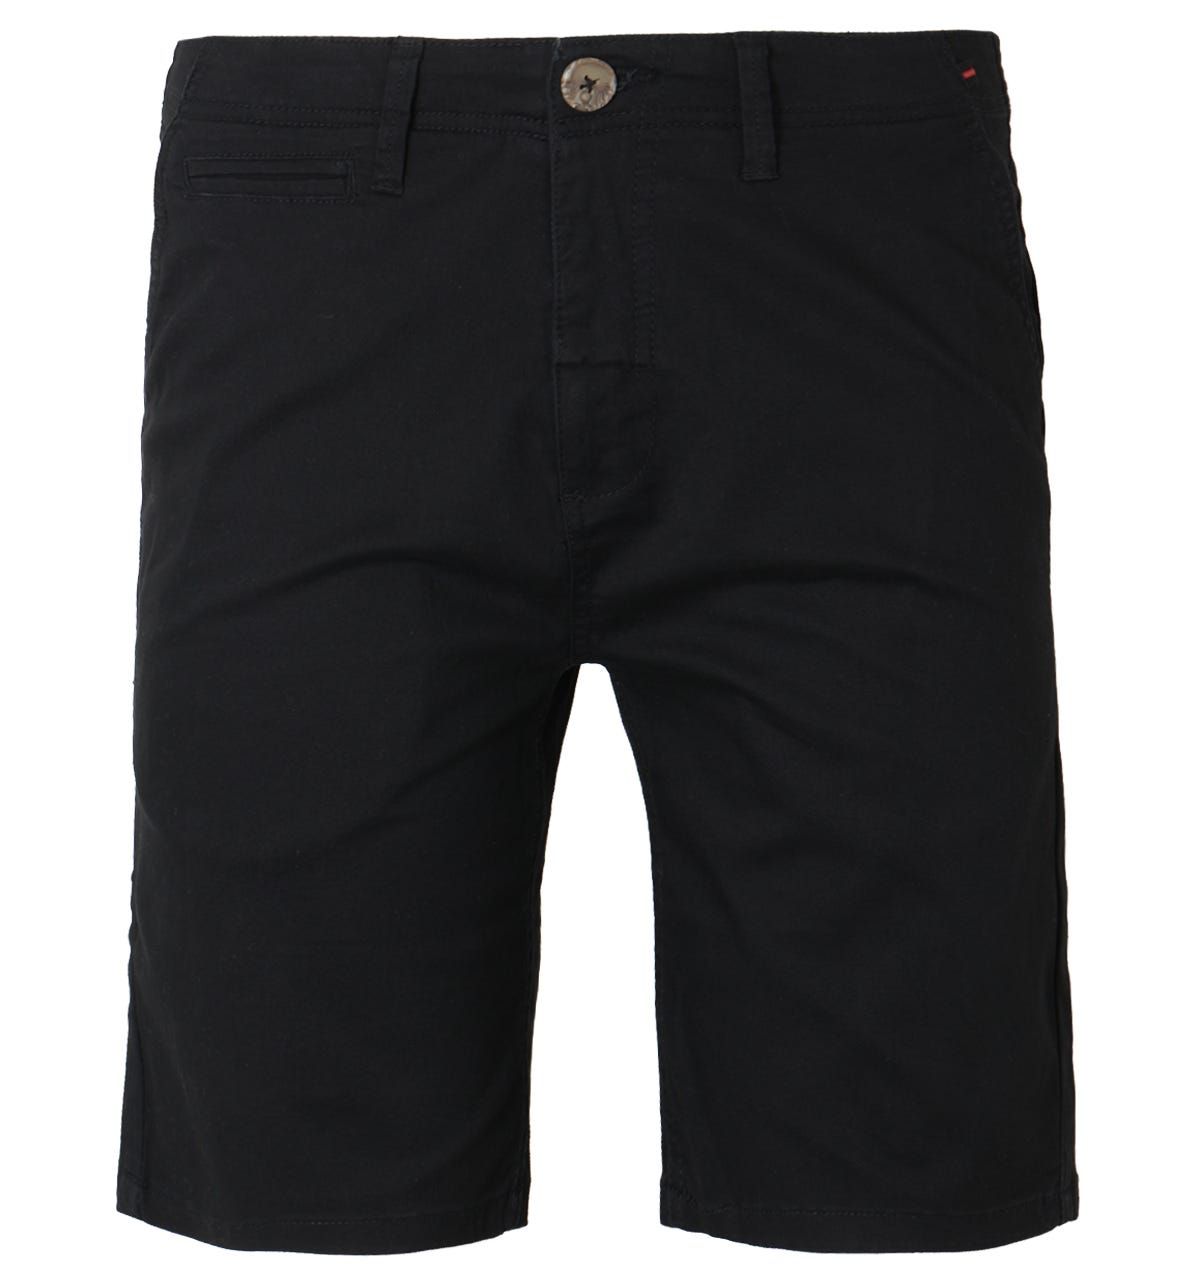 The Corbitt Chino Shorts combine comfort and style, ensuring you look great in and out of the house. Crafted from a stretch cotton, featuring Luke 1977 branding. Regular Fit, Stretch Cotton, Side Entry Pockets, Rear Horn Button Pockets, Luke1977 Branding. Style & Fit: Regular Fit, Fits True to Size. Composition & Care: 98% Cotton, 2% Elastane, Machine Wash.